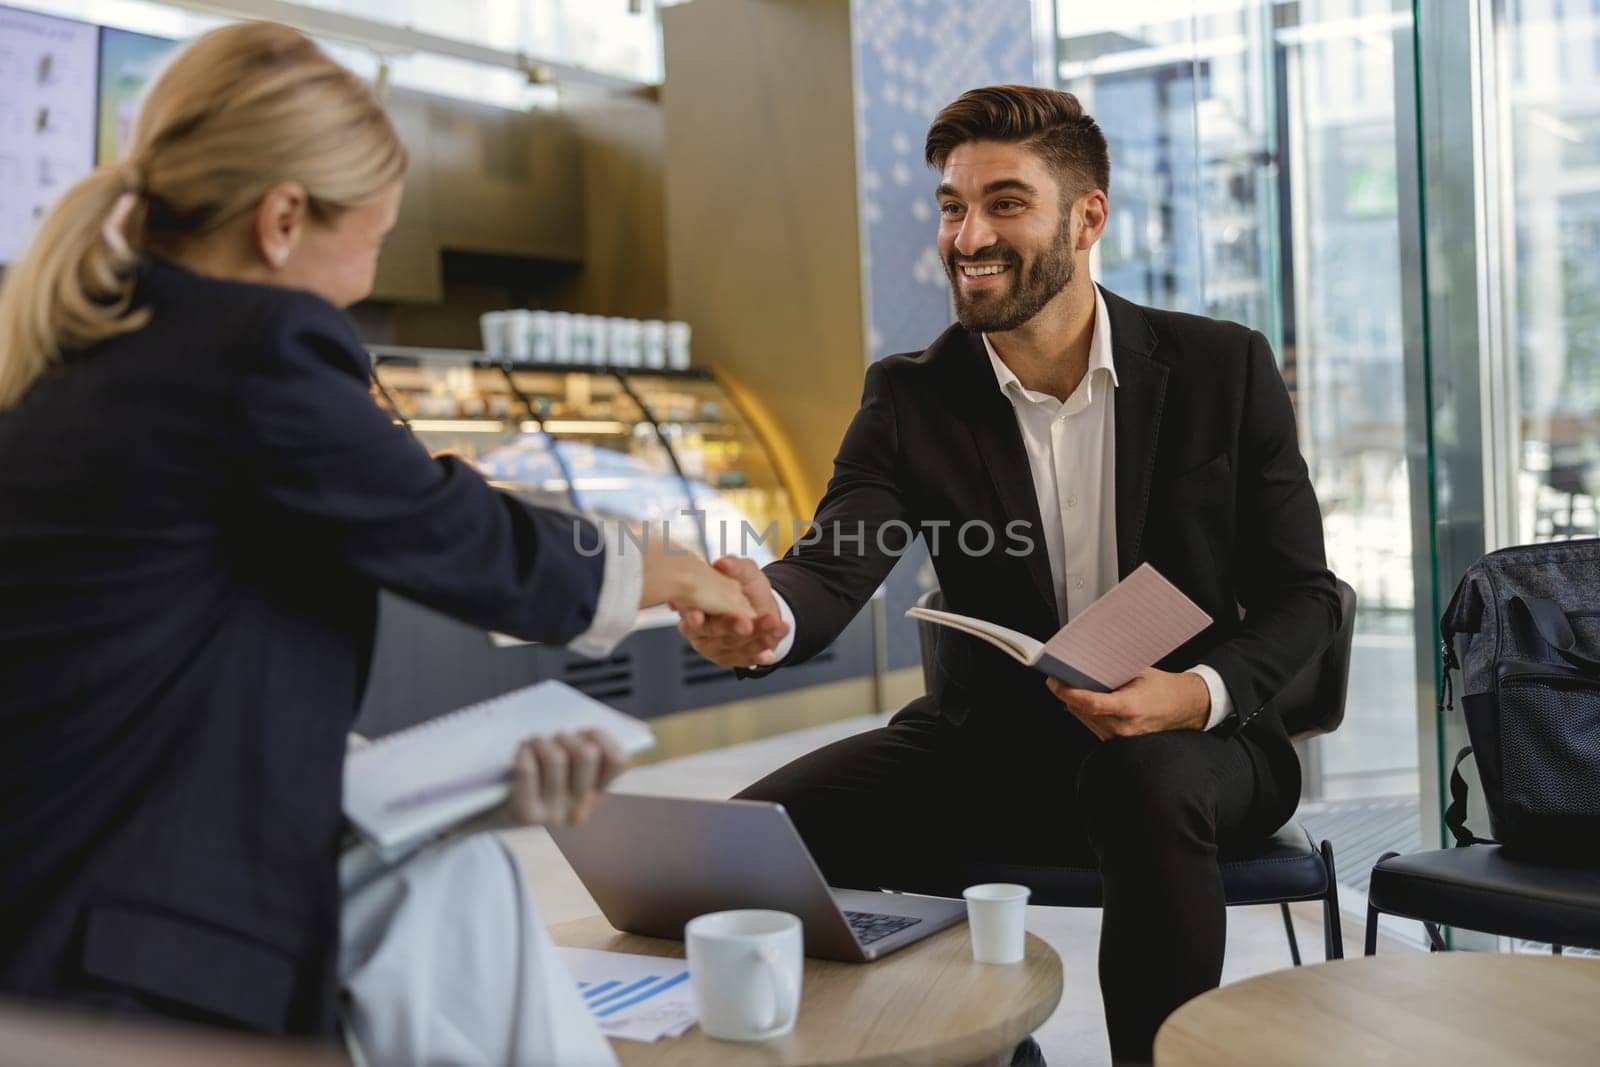 Business people shaking hands after agreement in front of the cozy cafe background